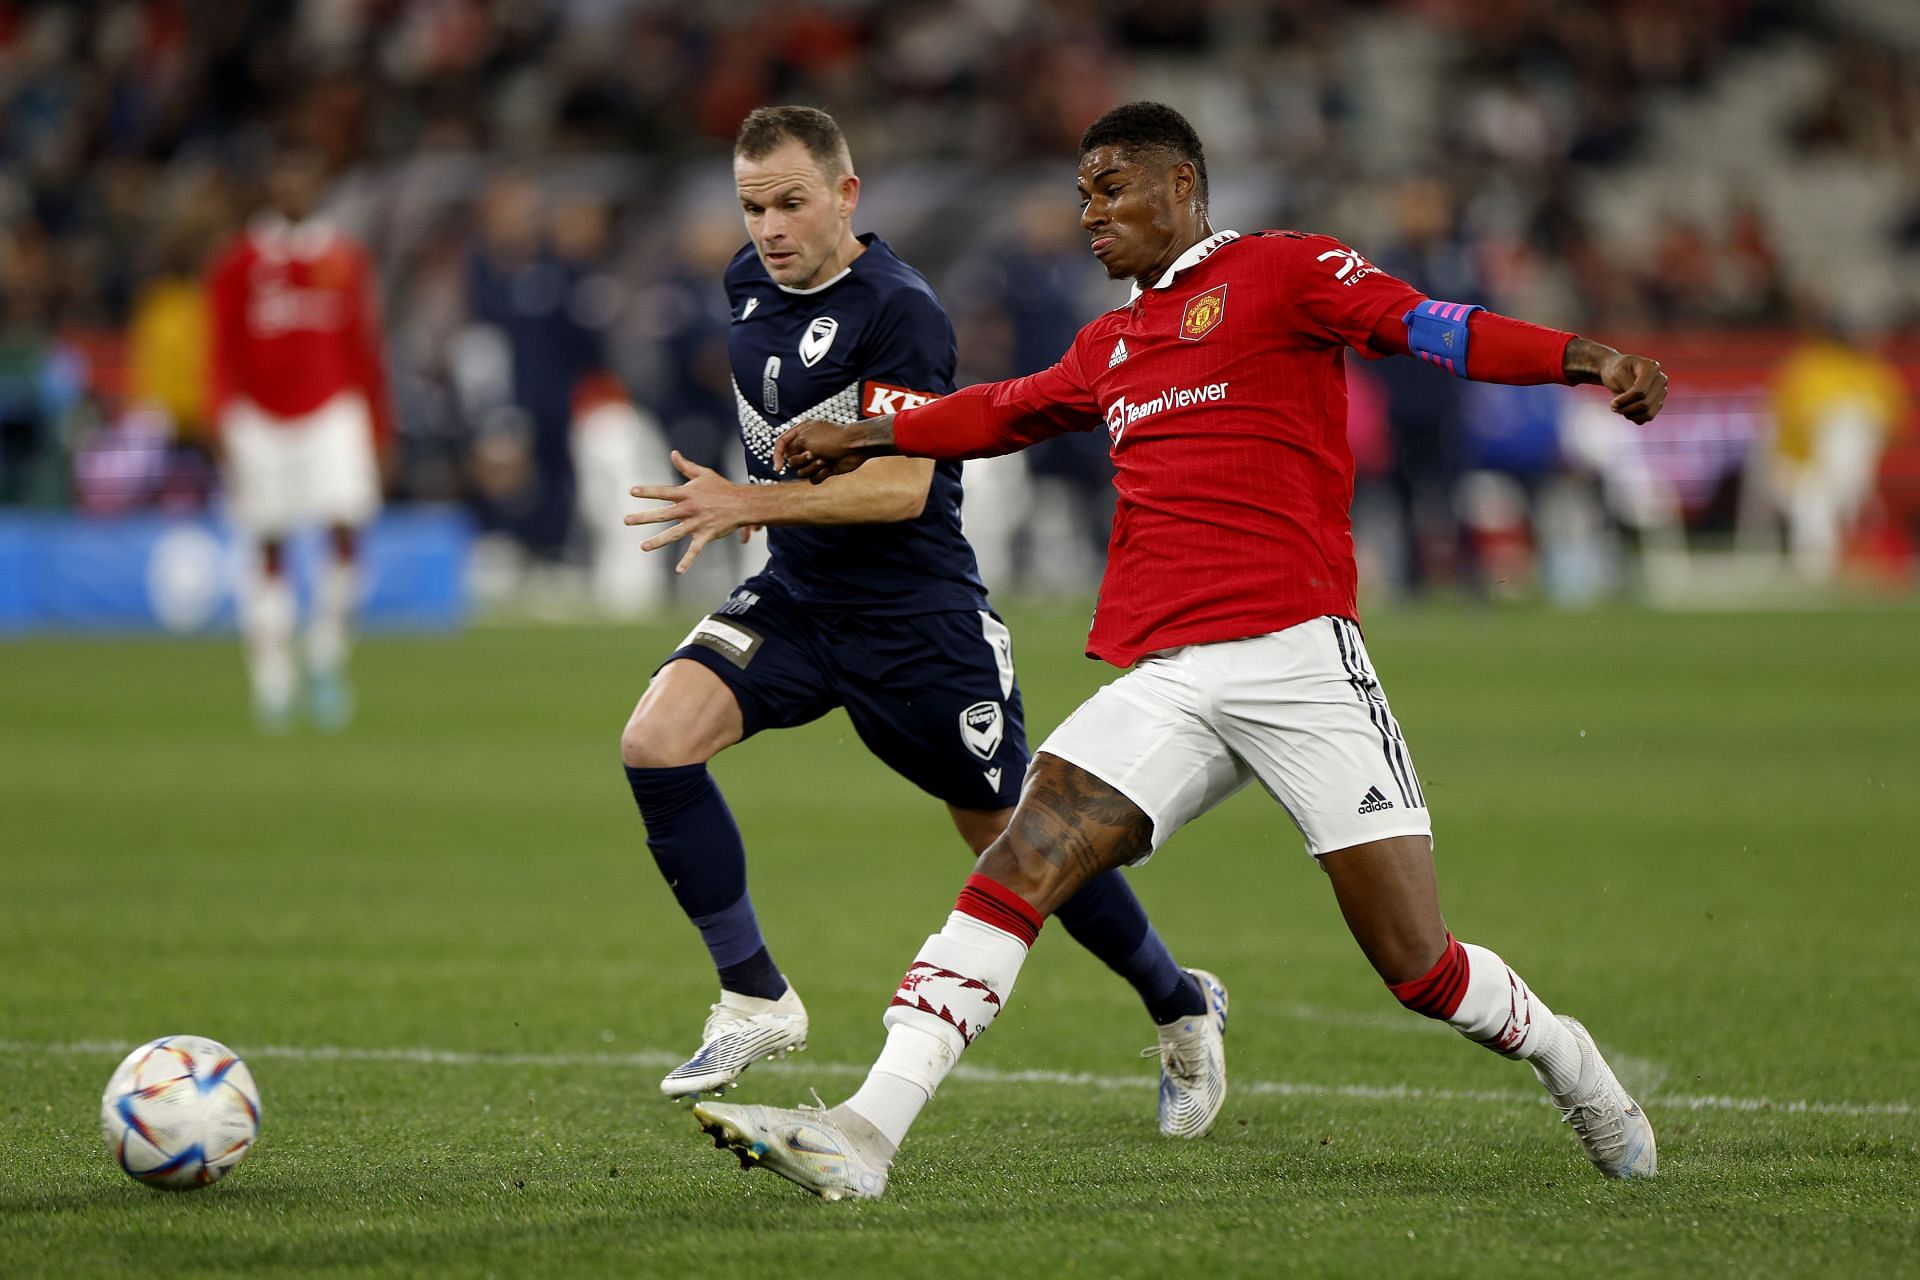 Melbourne win over Manchester United